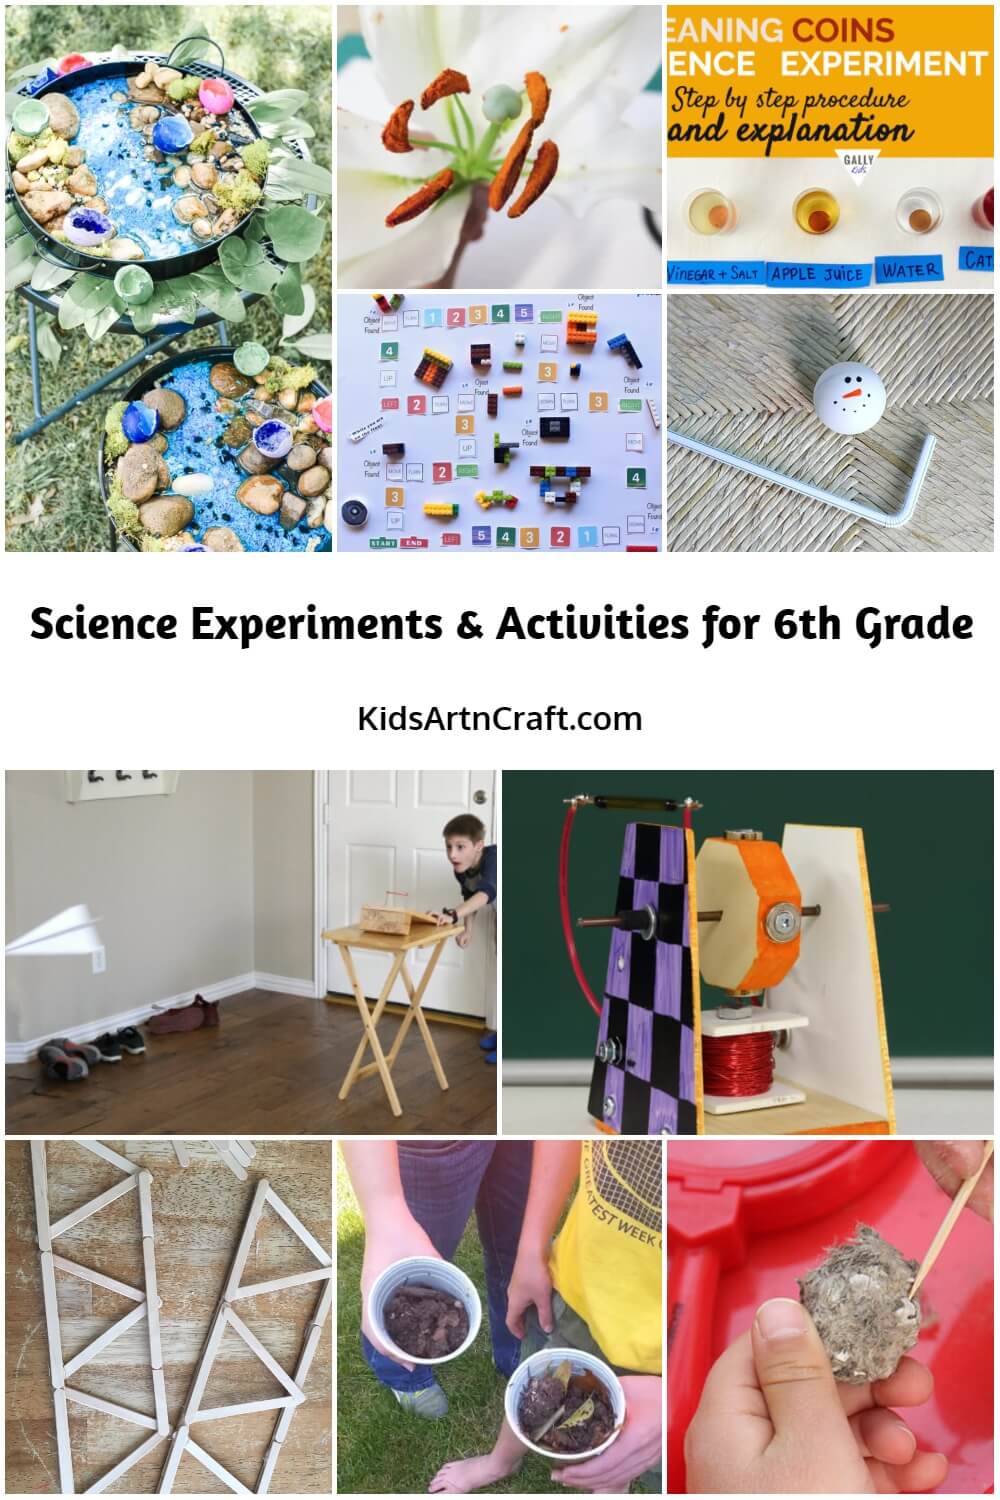 Science Experiments & Activities for 6th Grade